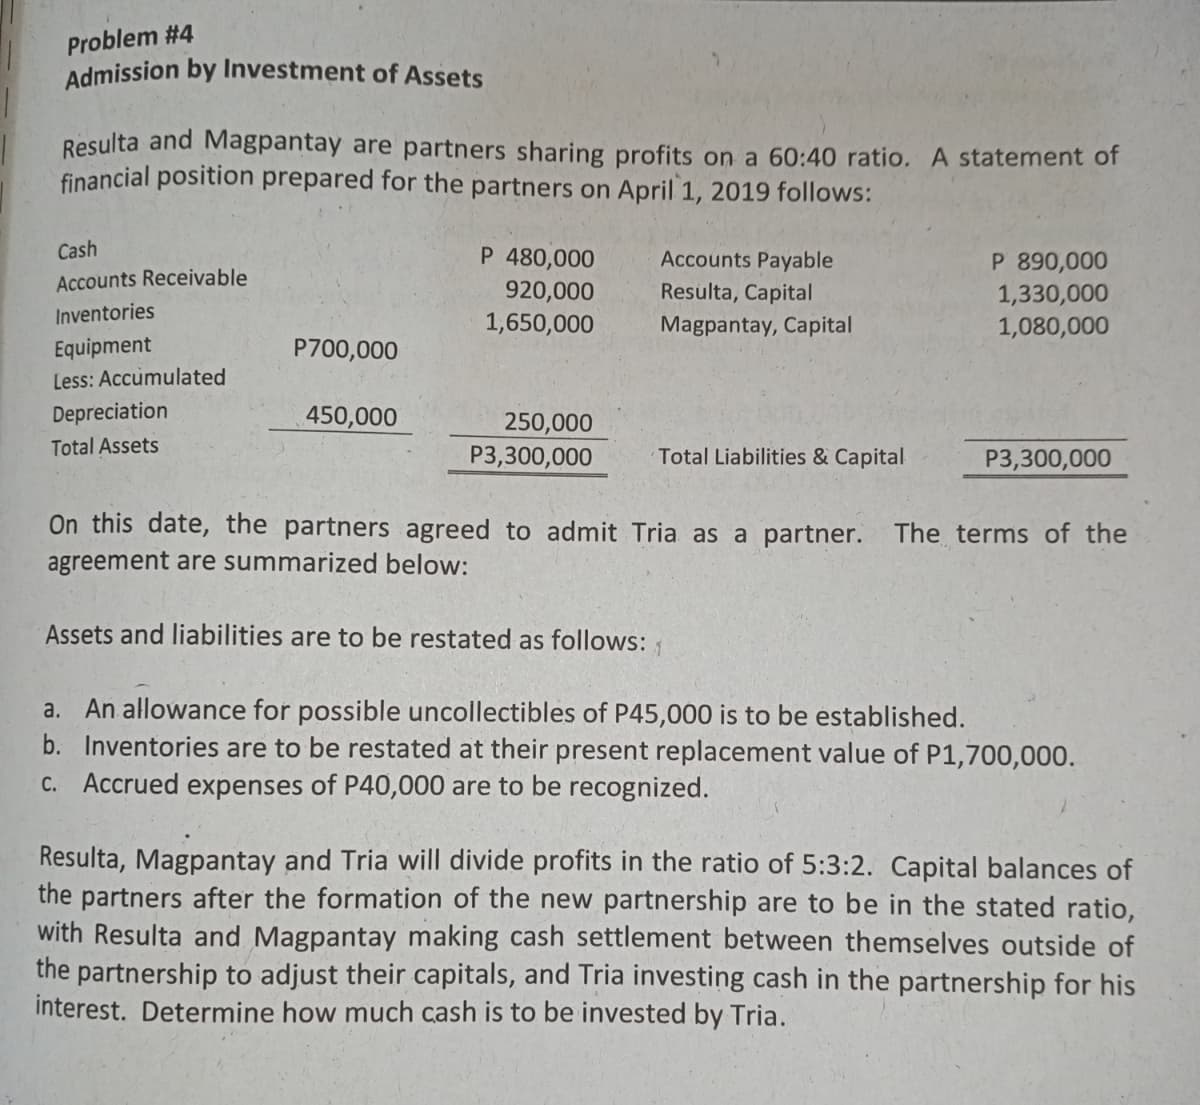 Problem #4
Admission by Investment of Assets
Resulta and Magpantay are partners sharing profits on a 60:40 ratio. A statement of
financial position prepared for the partners on April 1, 2019 follows:
Cash
P 480,000
Accounts Payable
P 890,000
1,330,000
Accounts Receivable
920,000
1,650,000
Resulta, Capital
Inventories
Magpantay, Capital
1,080,000
Equipment
P700,000
Less: Accumulated
Depreciation
450,000
250,000
P3,300,000
Total Assets
Total Liabilities & Capital
P3,300,000
On this date, the partners agreed to admit Tria as a partner. The terms of the
agreement are summarized below:
Assets and liabilities are to be restated as follows:
a. An allowance for possible uncollectibles of P45,000 is to be established.
b. Inventories are to be restated at their present replacement value of P1,700,000.
C. Accrued expenses of P40,000 are to be recognized.
Resulta, Magpantay and Tria will divide profits in the ratio of 5:3:2. Capital balances of
the partners after the formation of the new partnership are to be in the stated ratio,
with Resulta and Magpantay making cash settlement between themselves outside of
the partnership to adjust their capitals, and Tria investing cash in the partnership for his
interest. Determine how much cash is to be invested by Tria.
